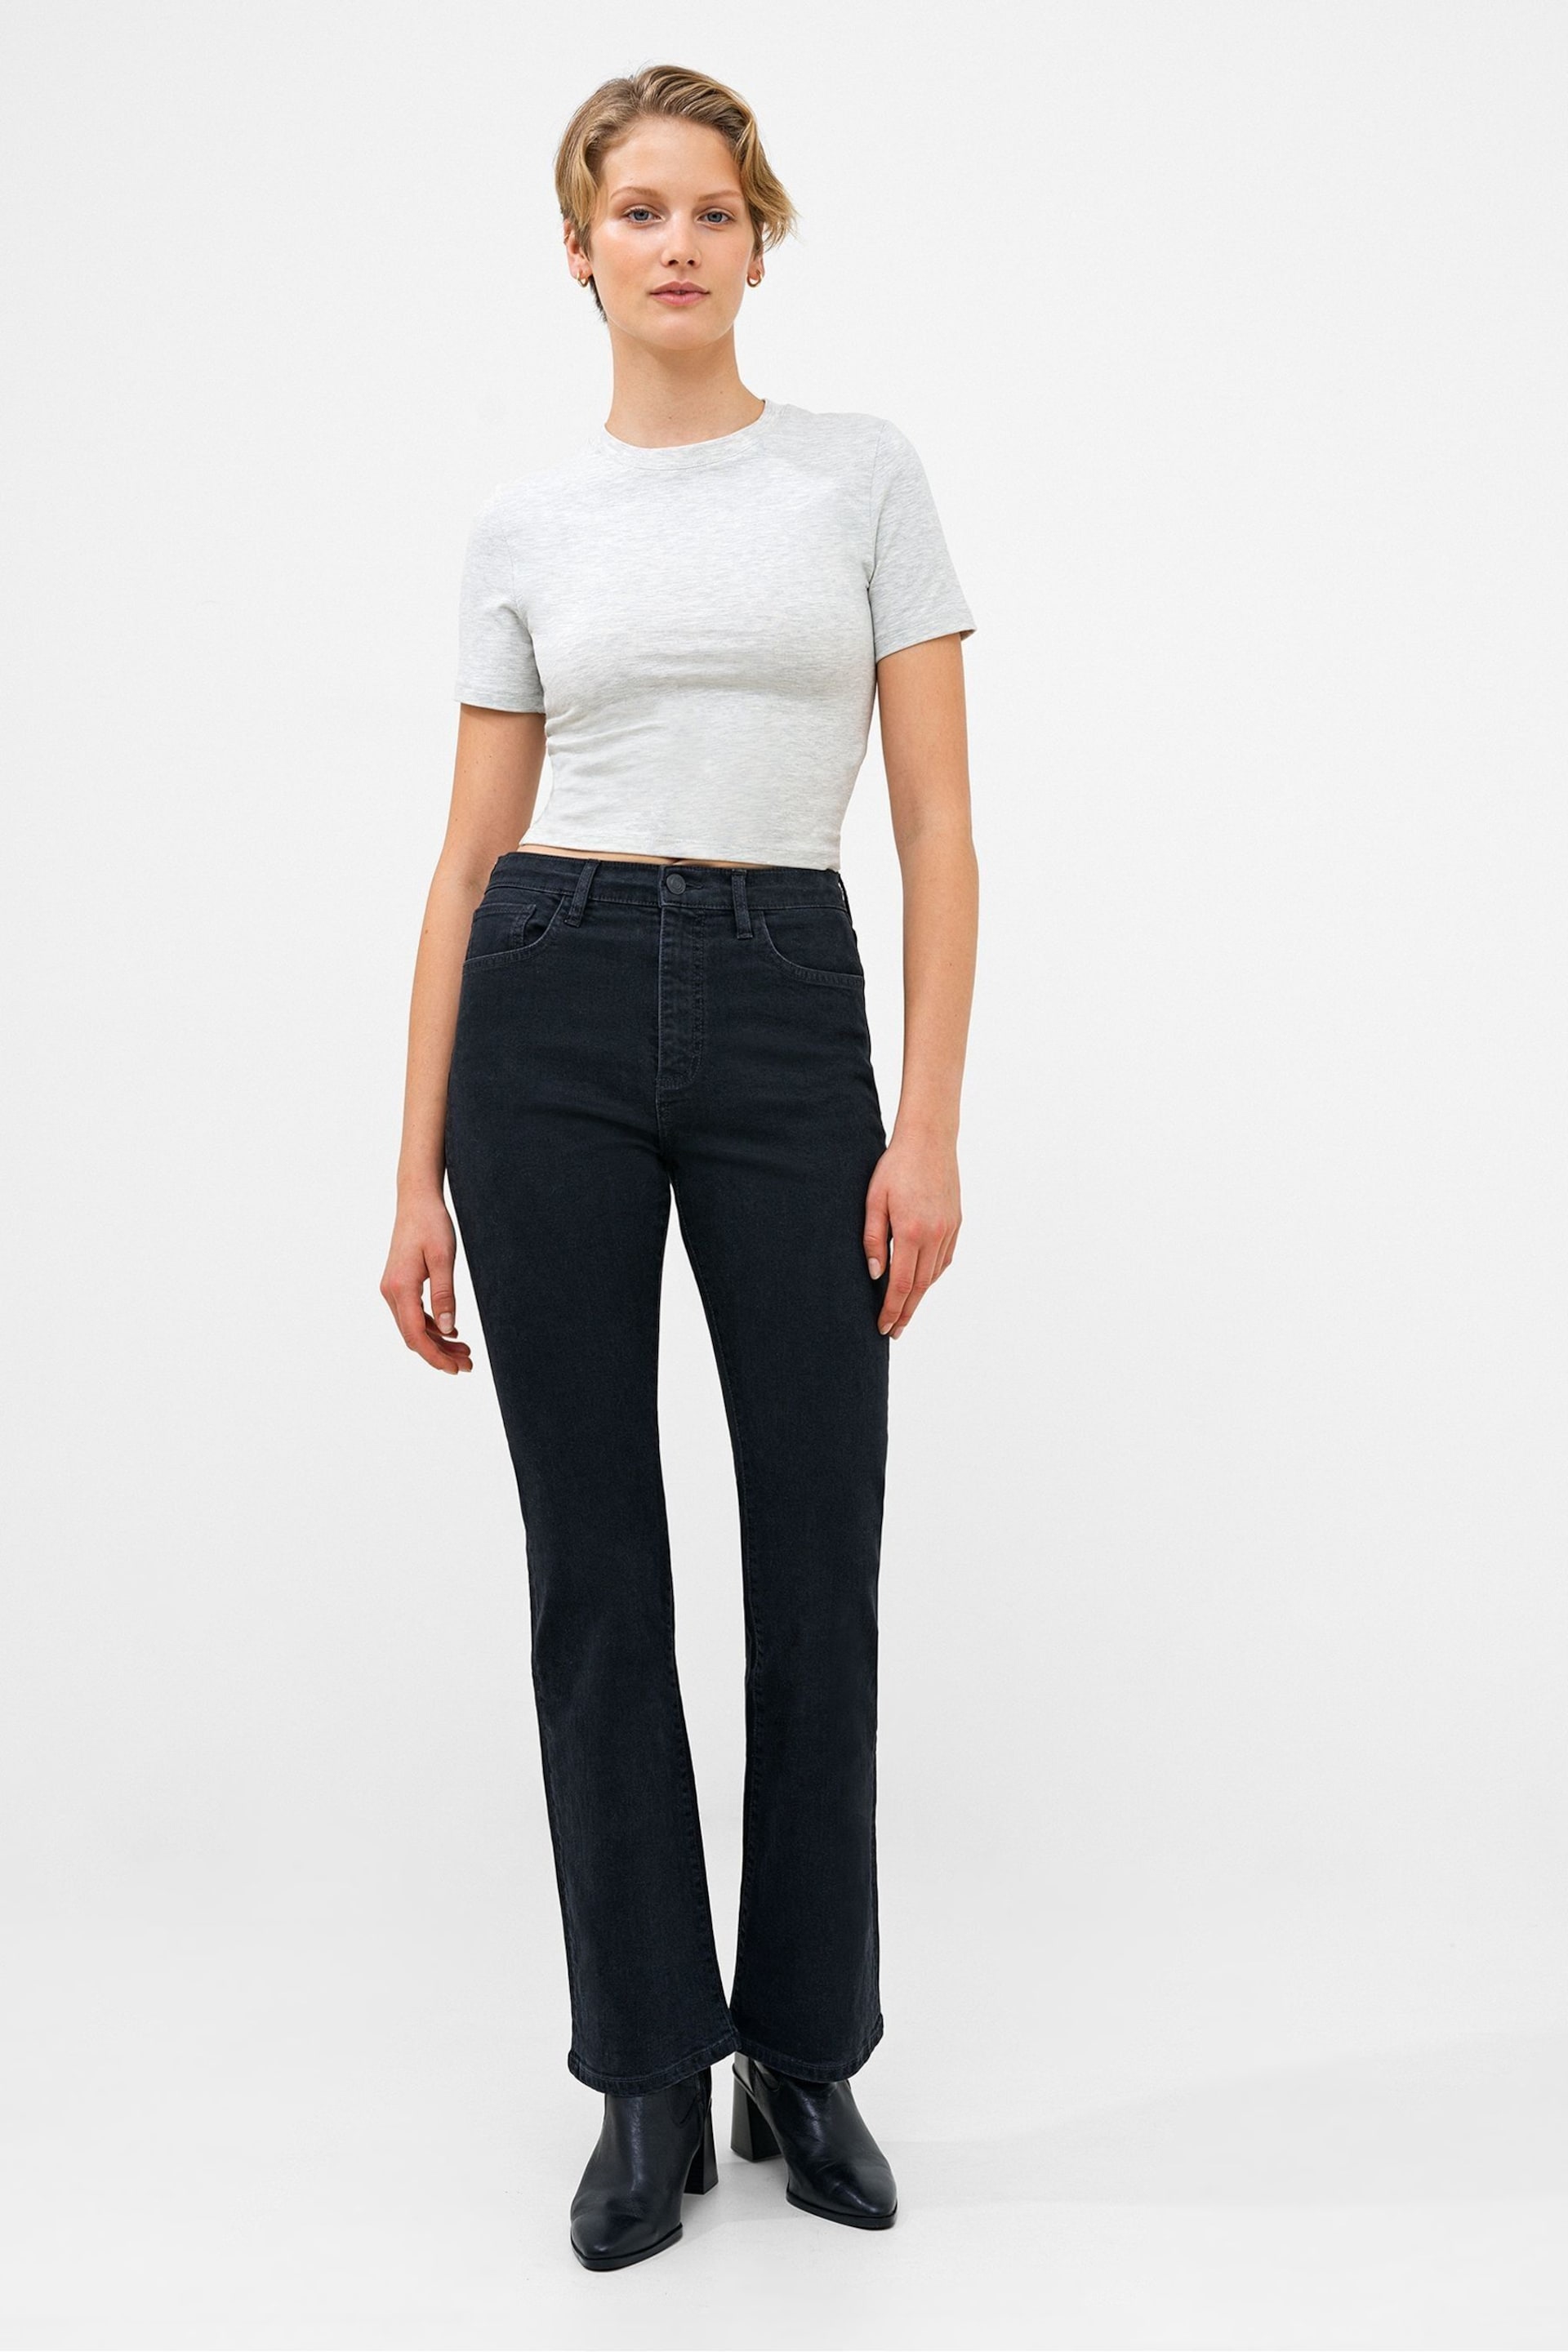 French Connection Stretch Denim Boot Cut Full Length Trousers - Image 1 of 4